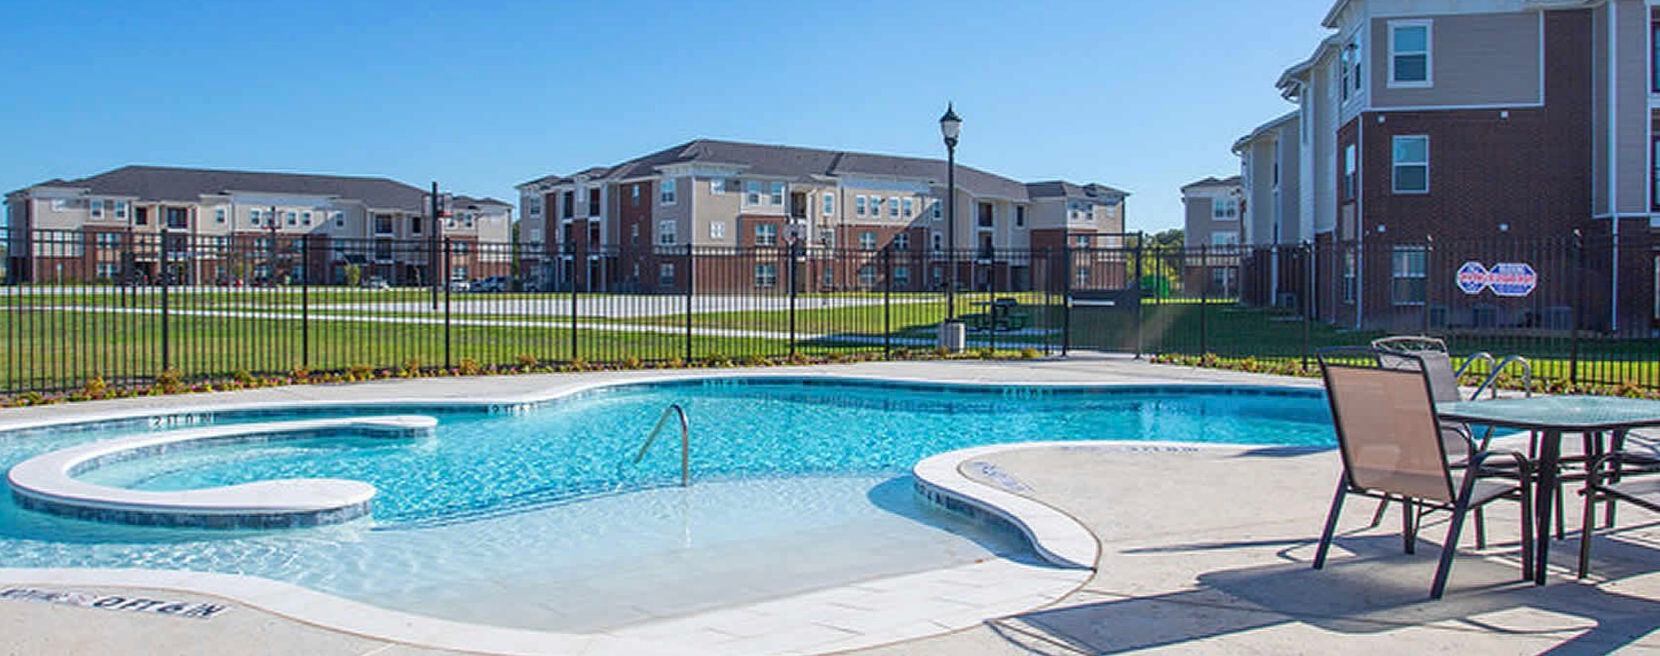 Developer Liberty Multifamily just built a 240-unit affordable rental community on...